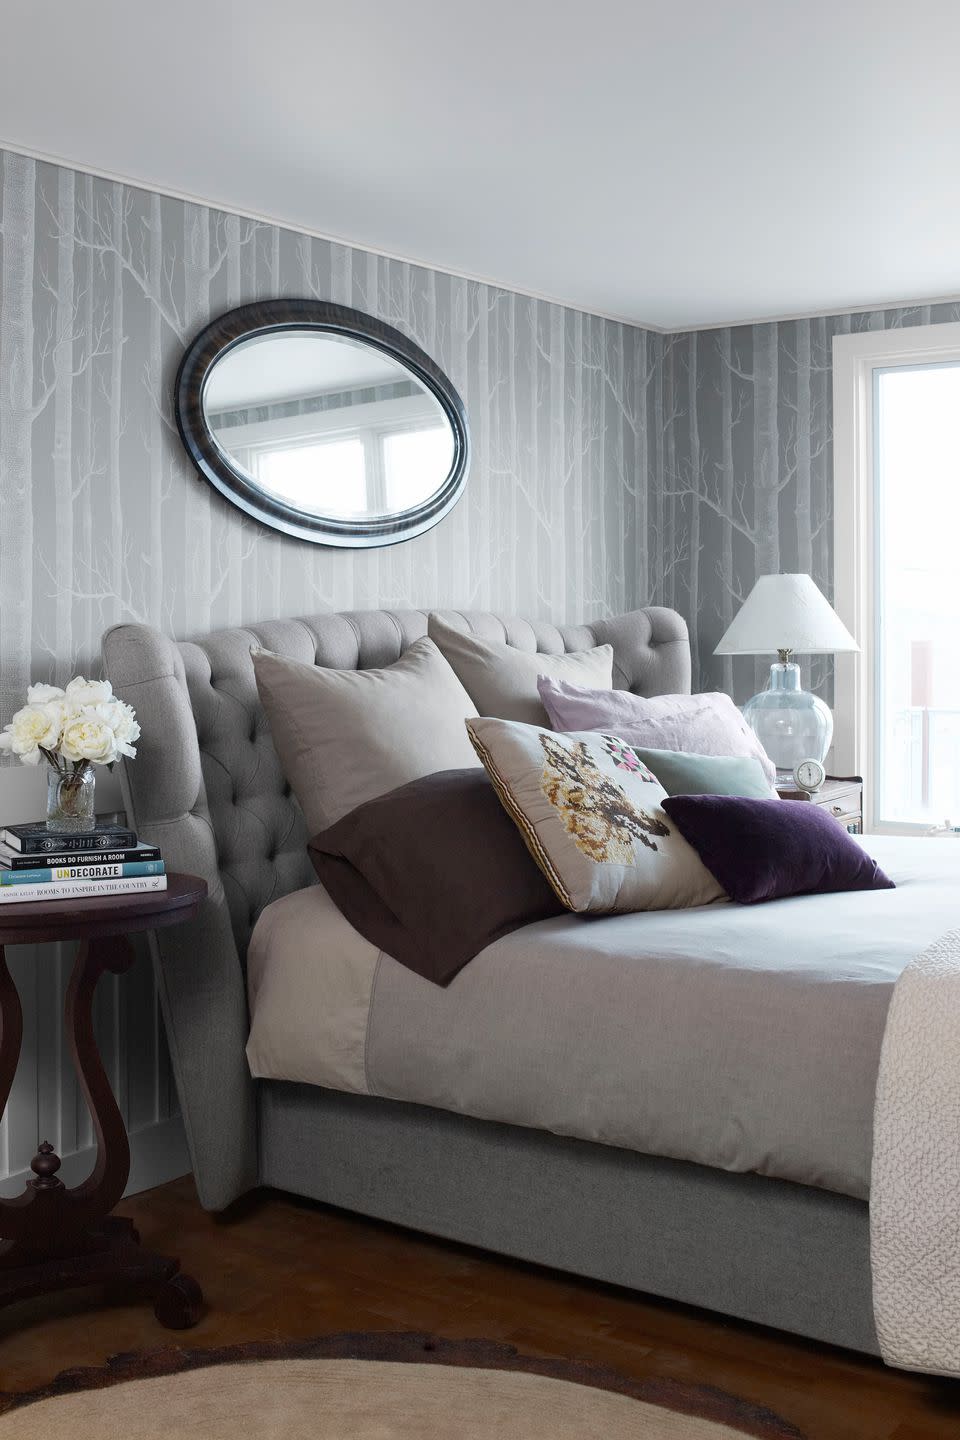 Try a Tufted Headboard